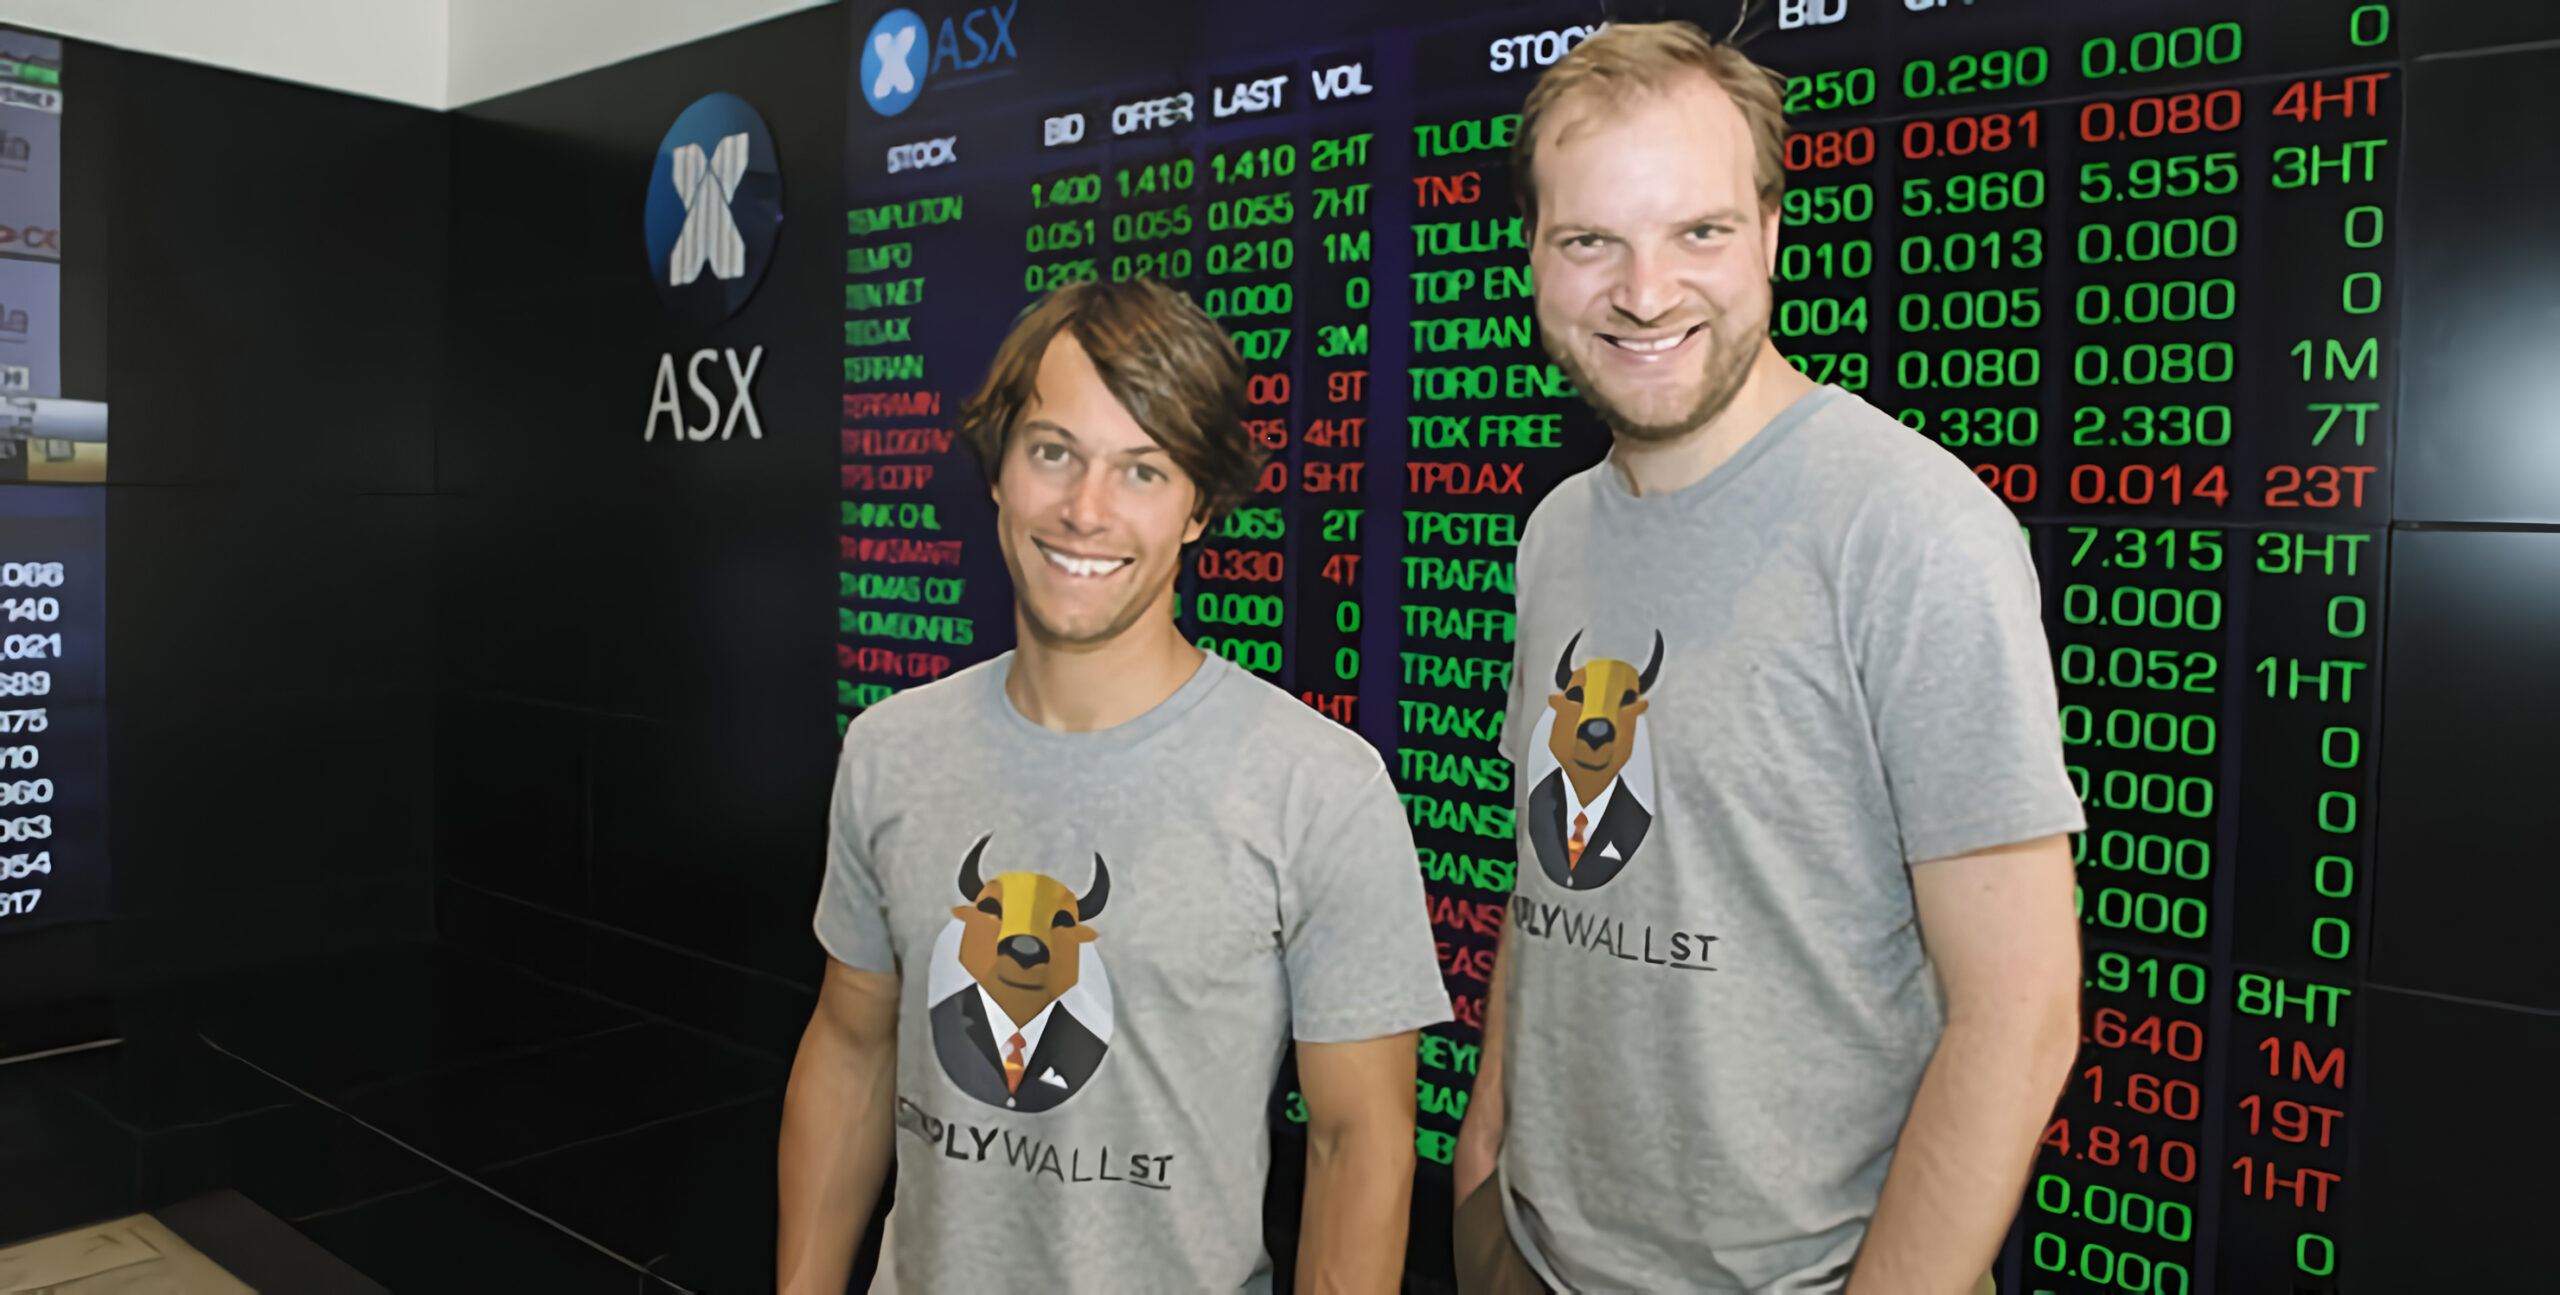 Simply Wall St was founded in 2014 by Al Bentley and Nick van den Berg